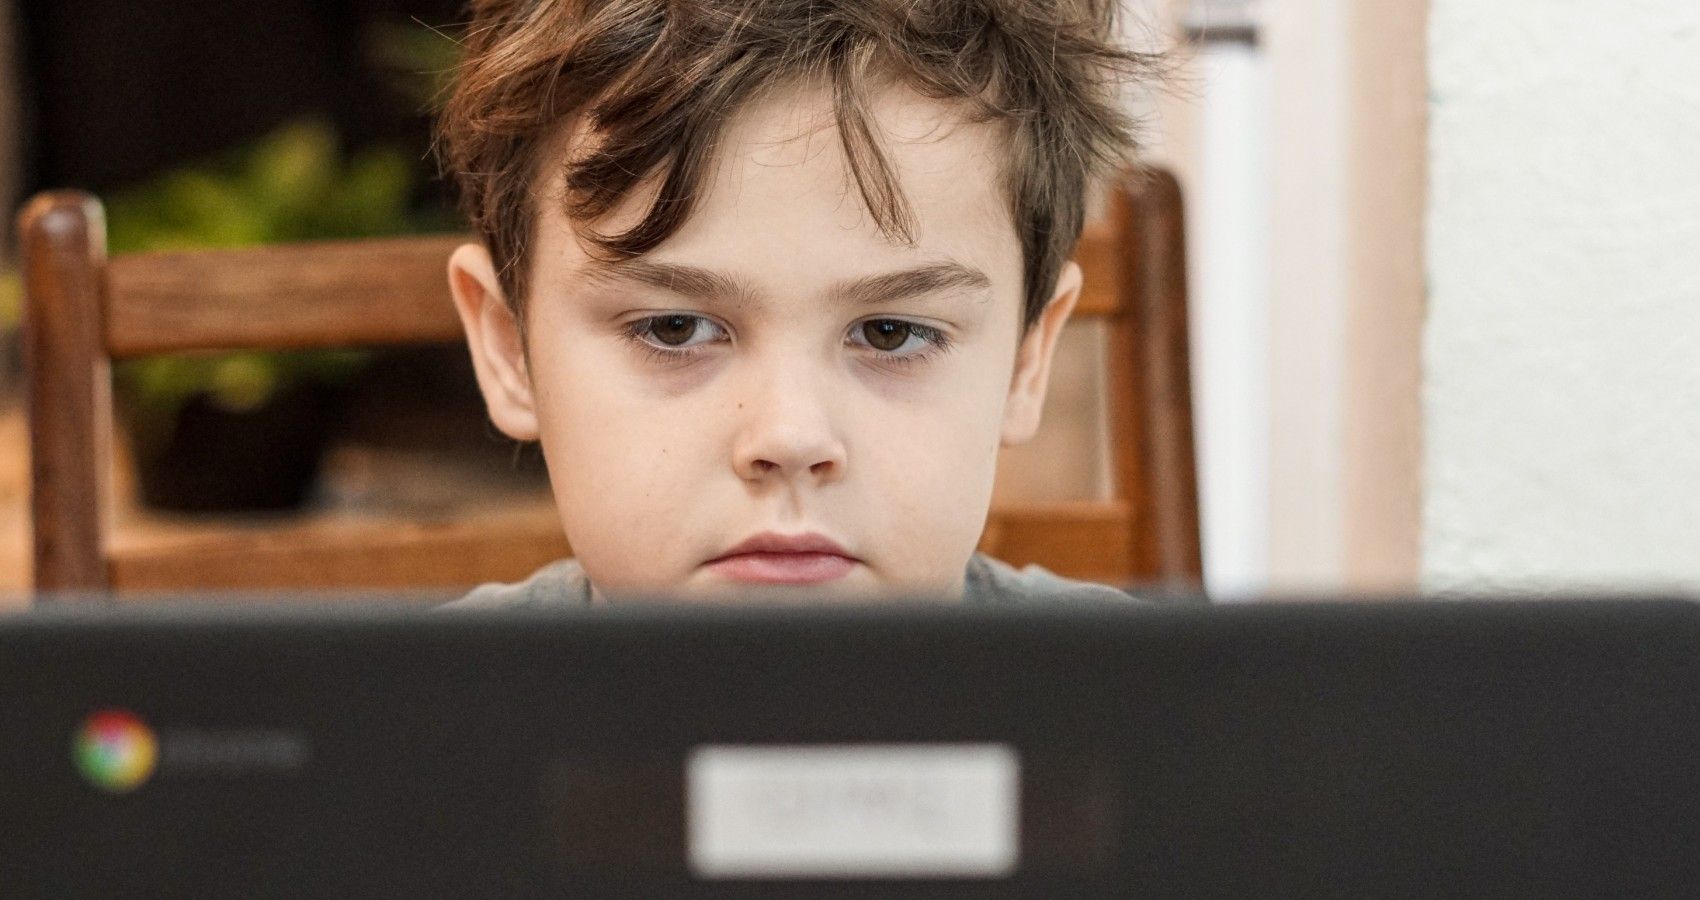 A Young Boy Sitting At A Computer